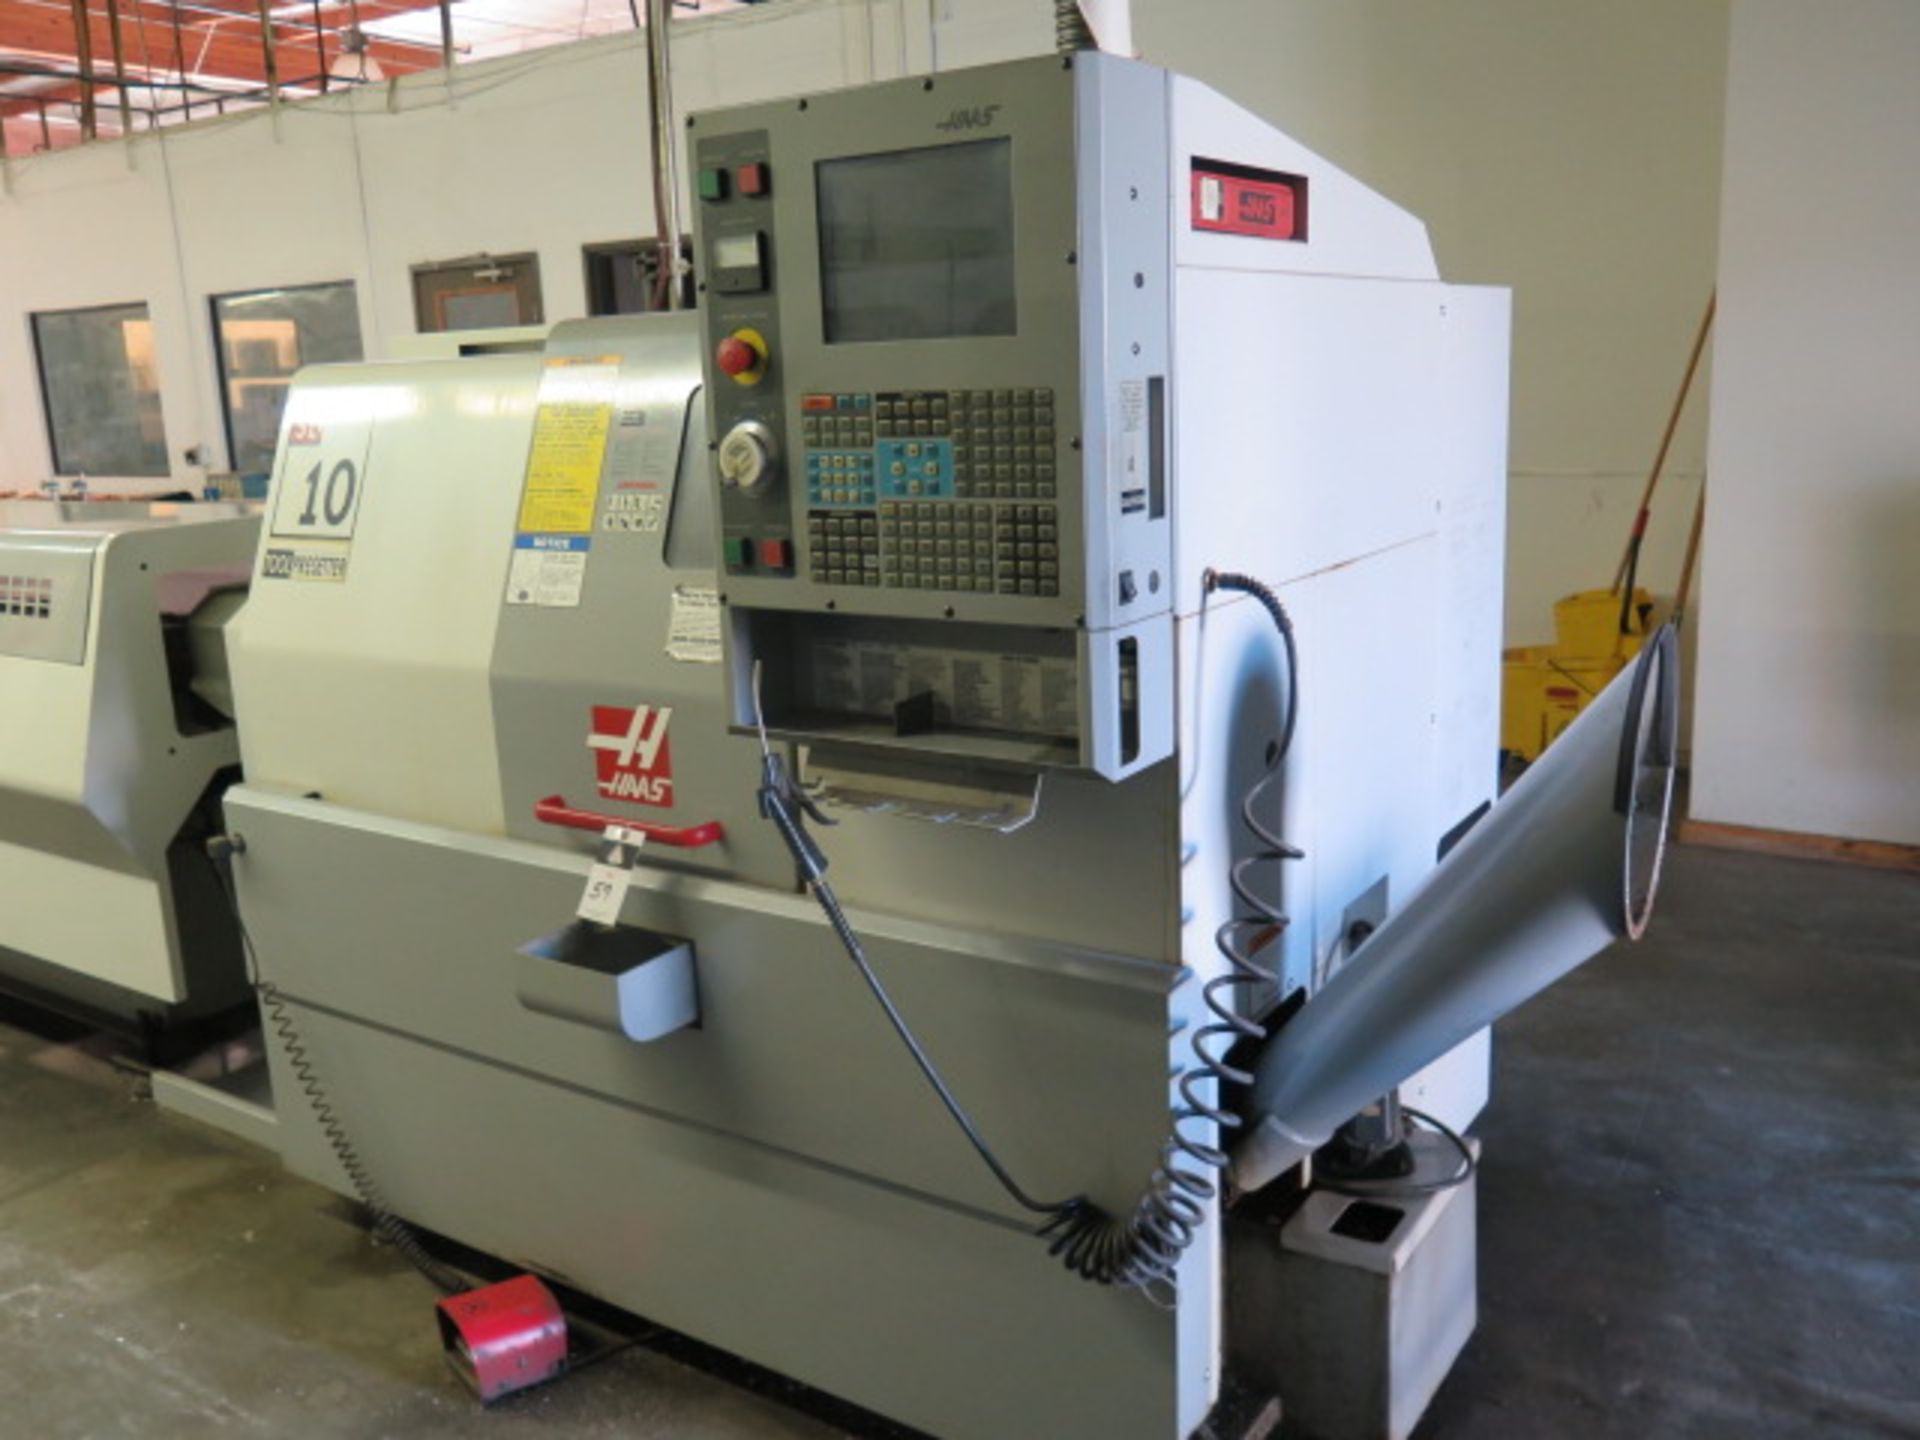 2004 Haas SL-10 CNC Turning Center s/n 68182, Tool Presetter, 12-Station Turret, SOLD AS IS - Image 2 of 14